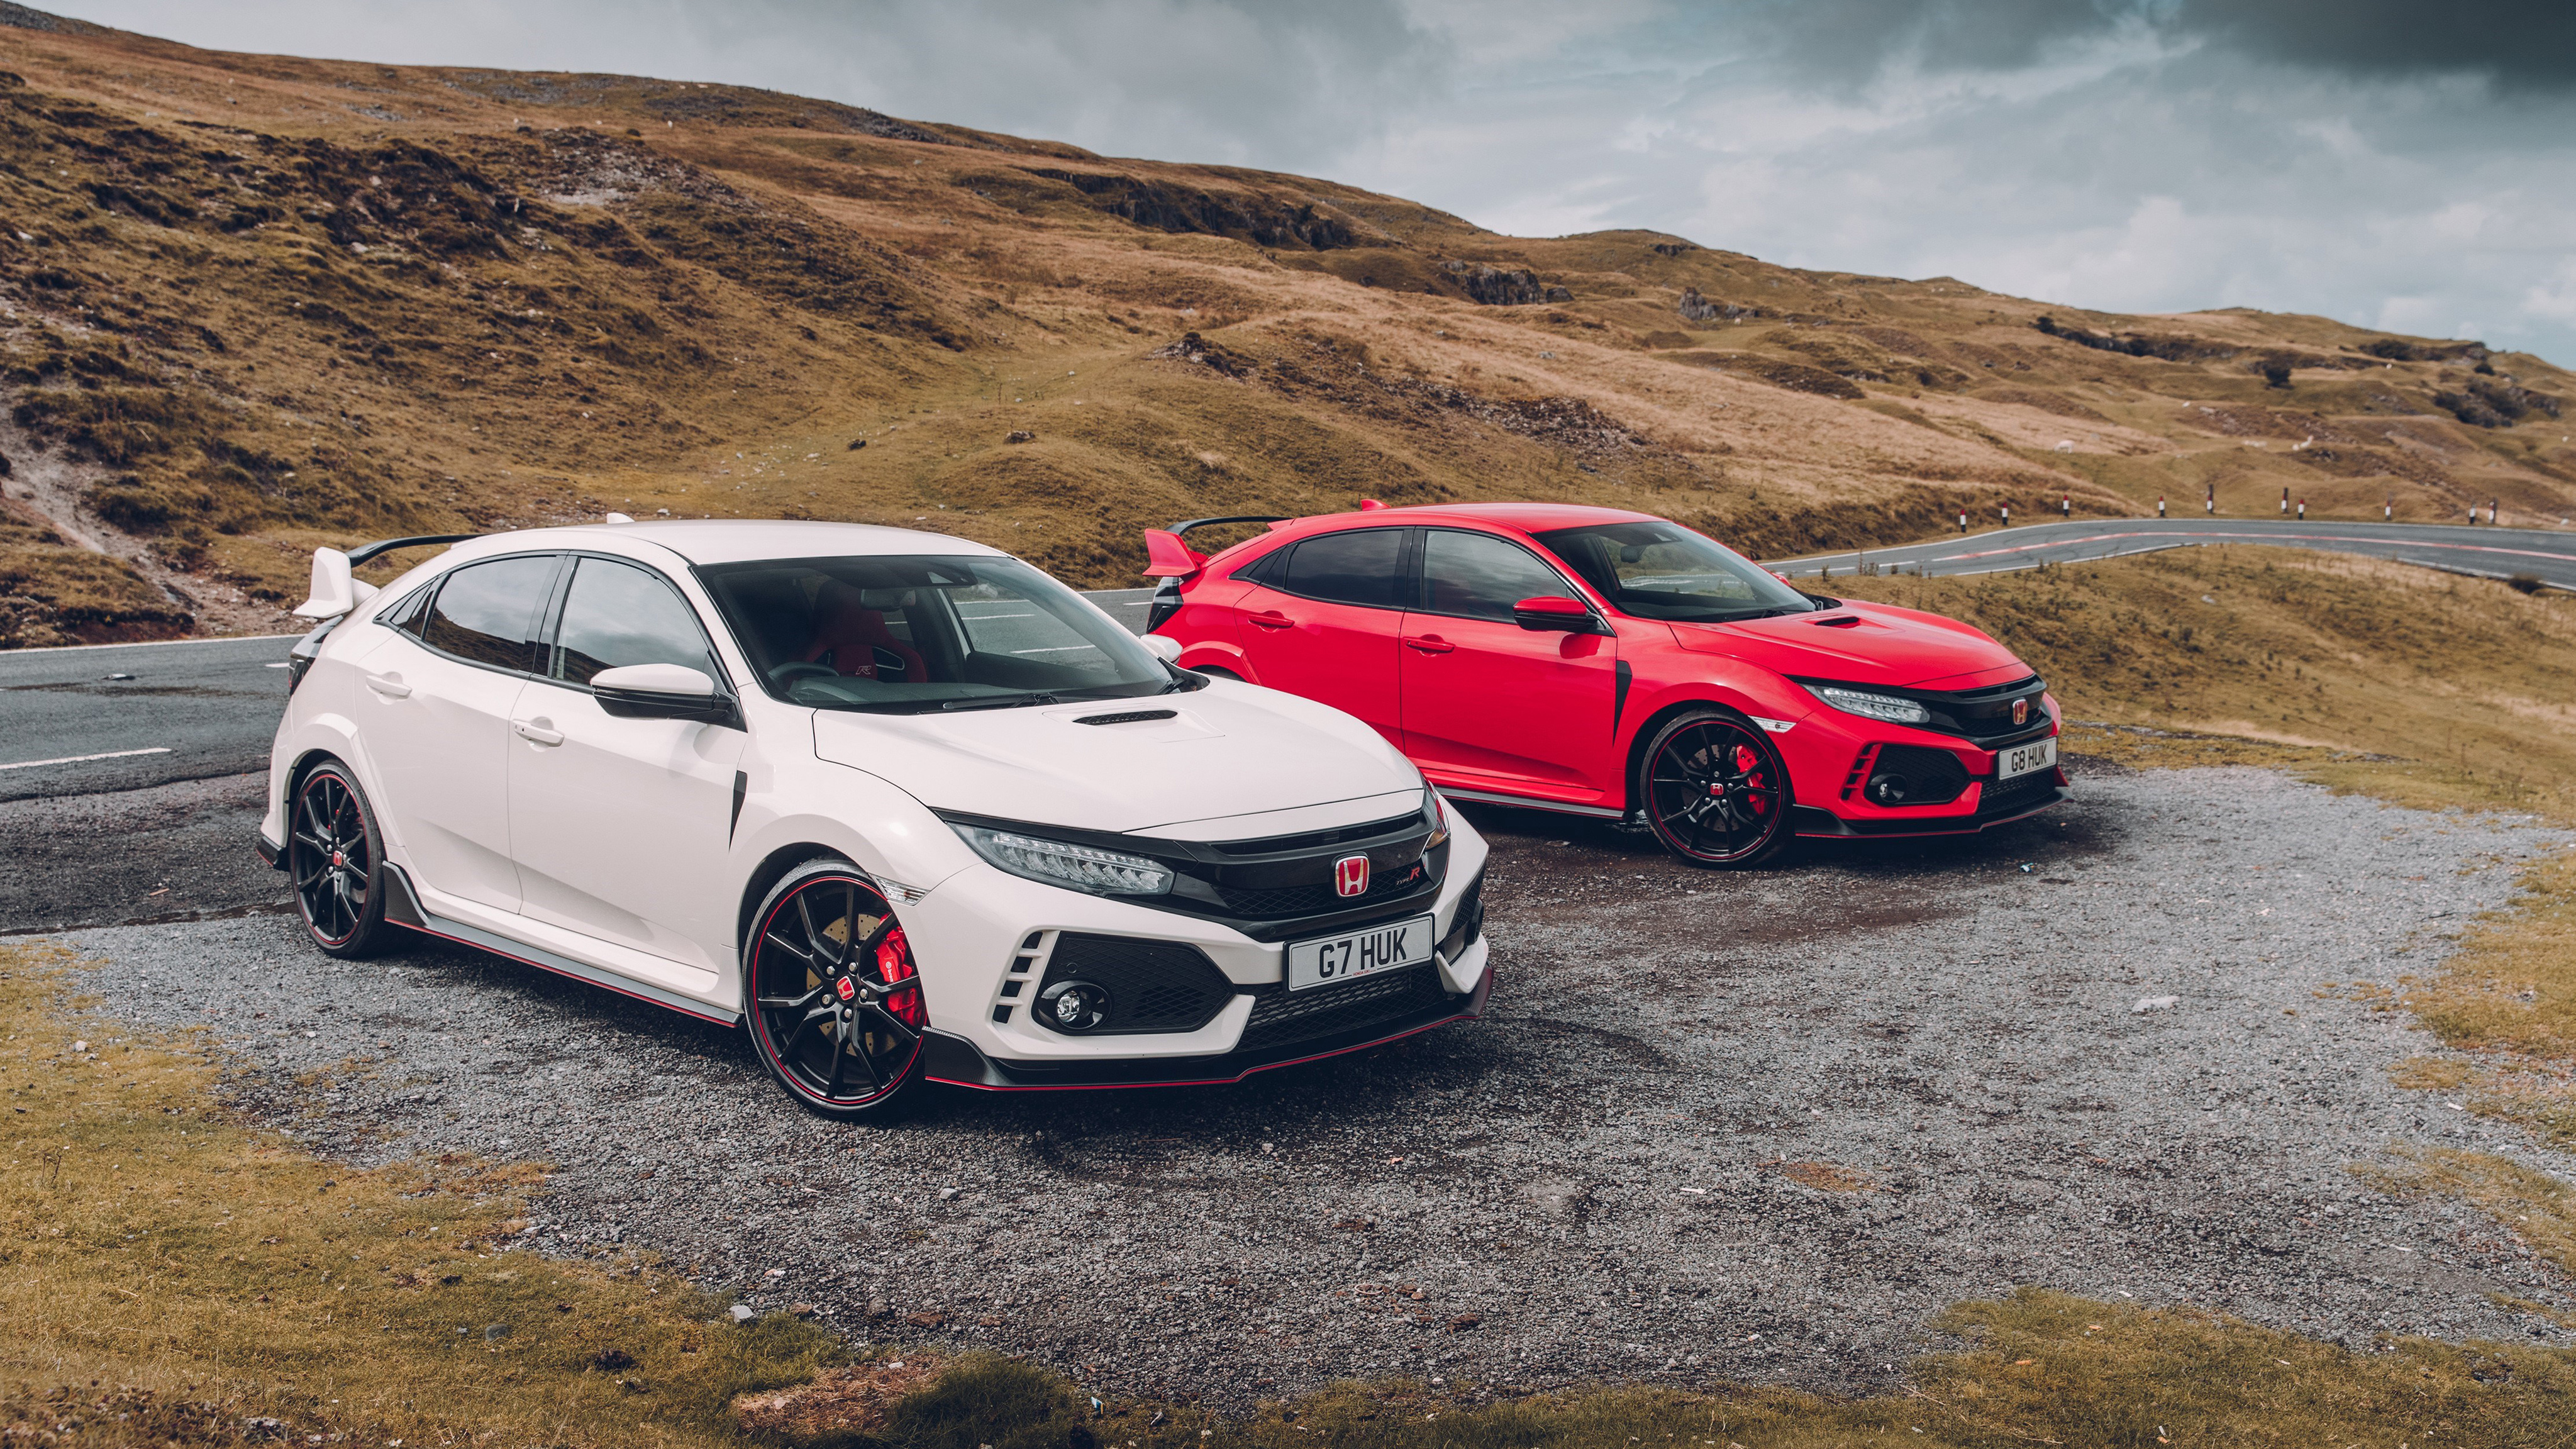 Honda Civic Type R hatchback specifications